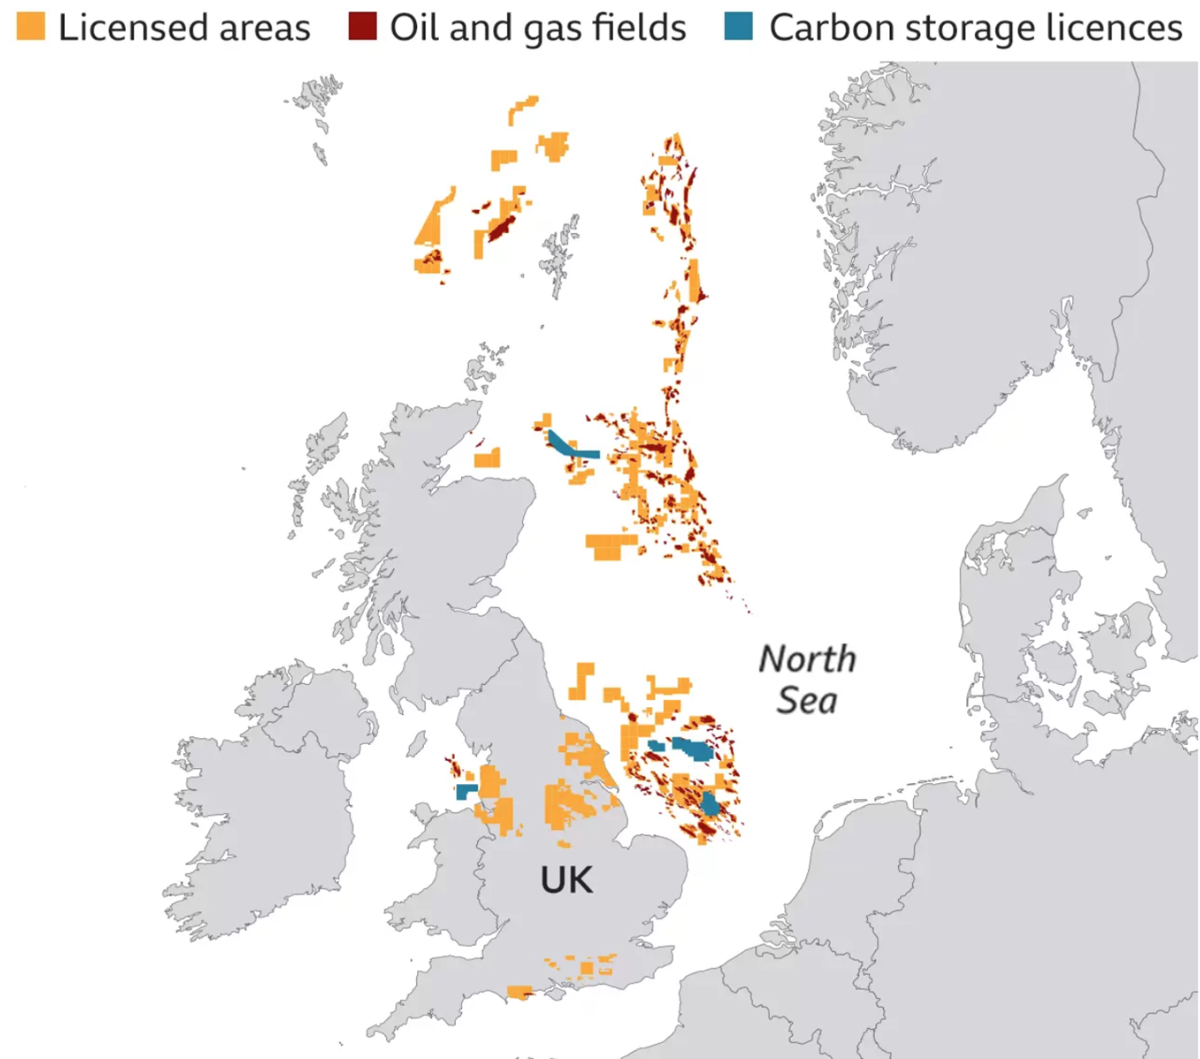 Current North Sea oil and gas activity